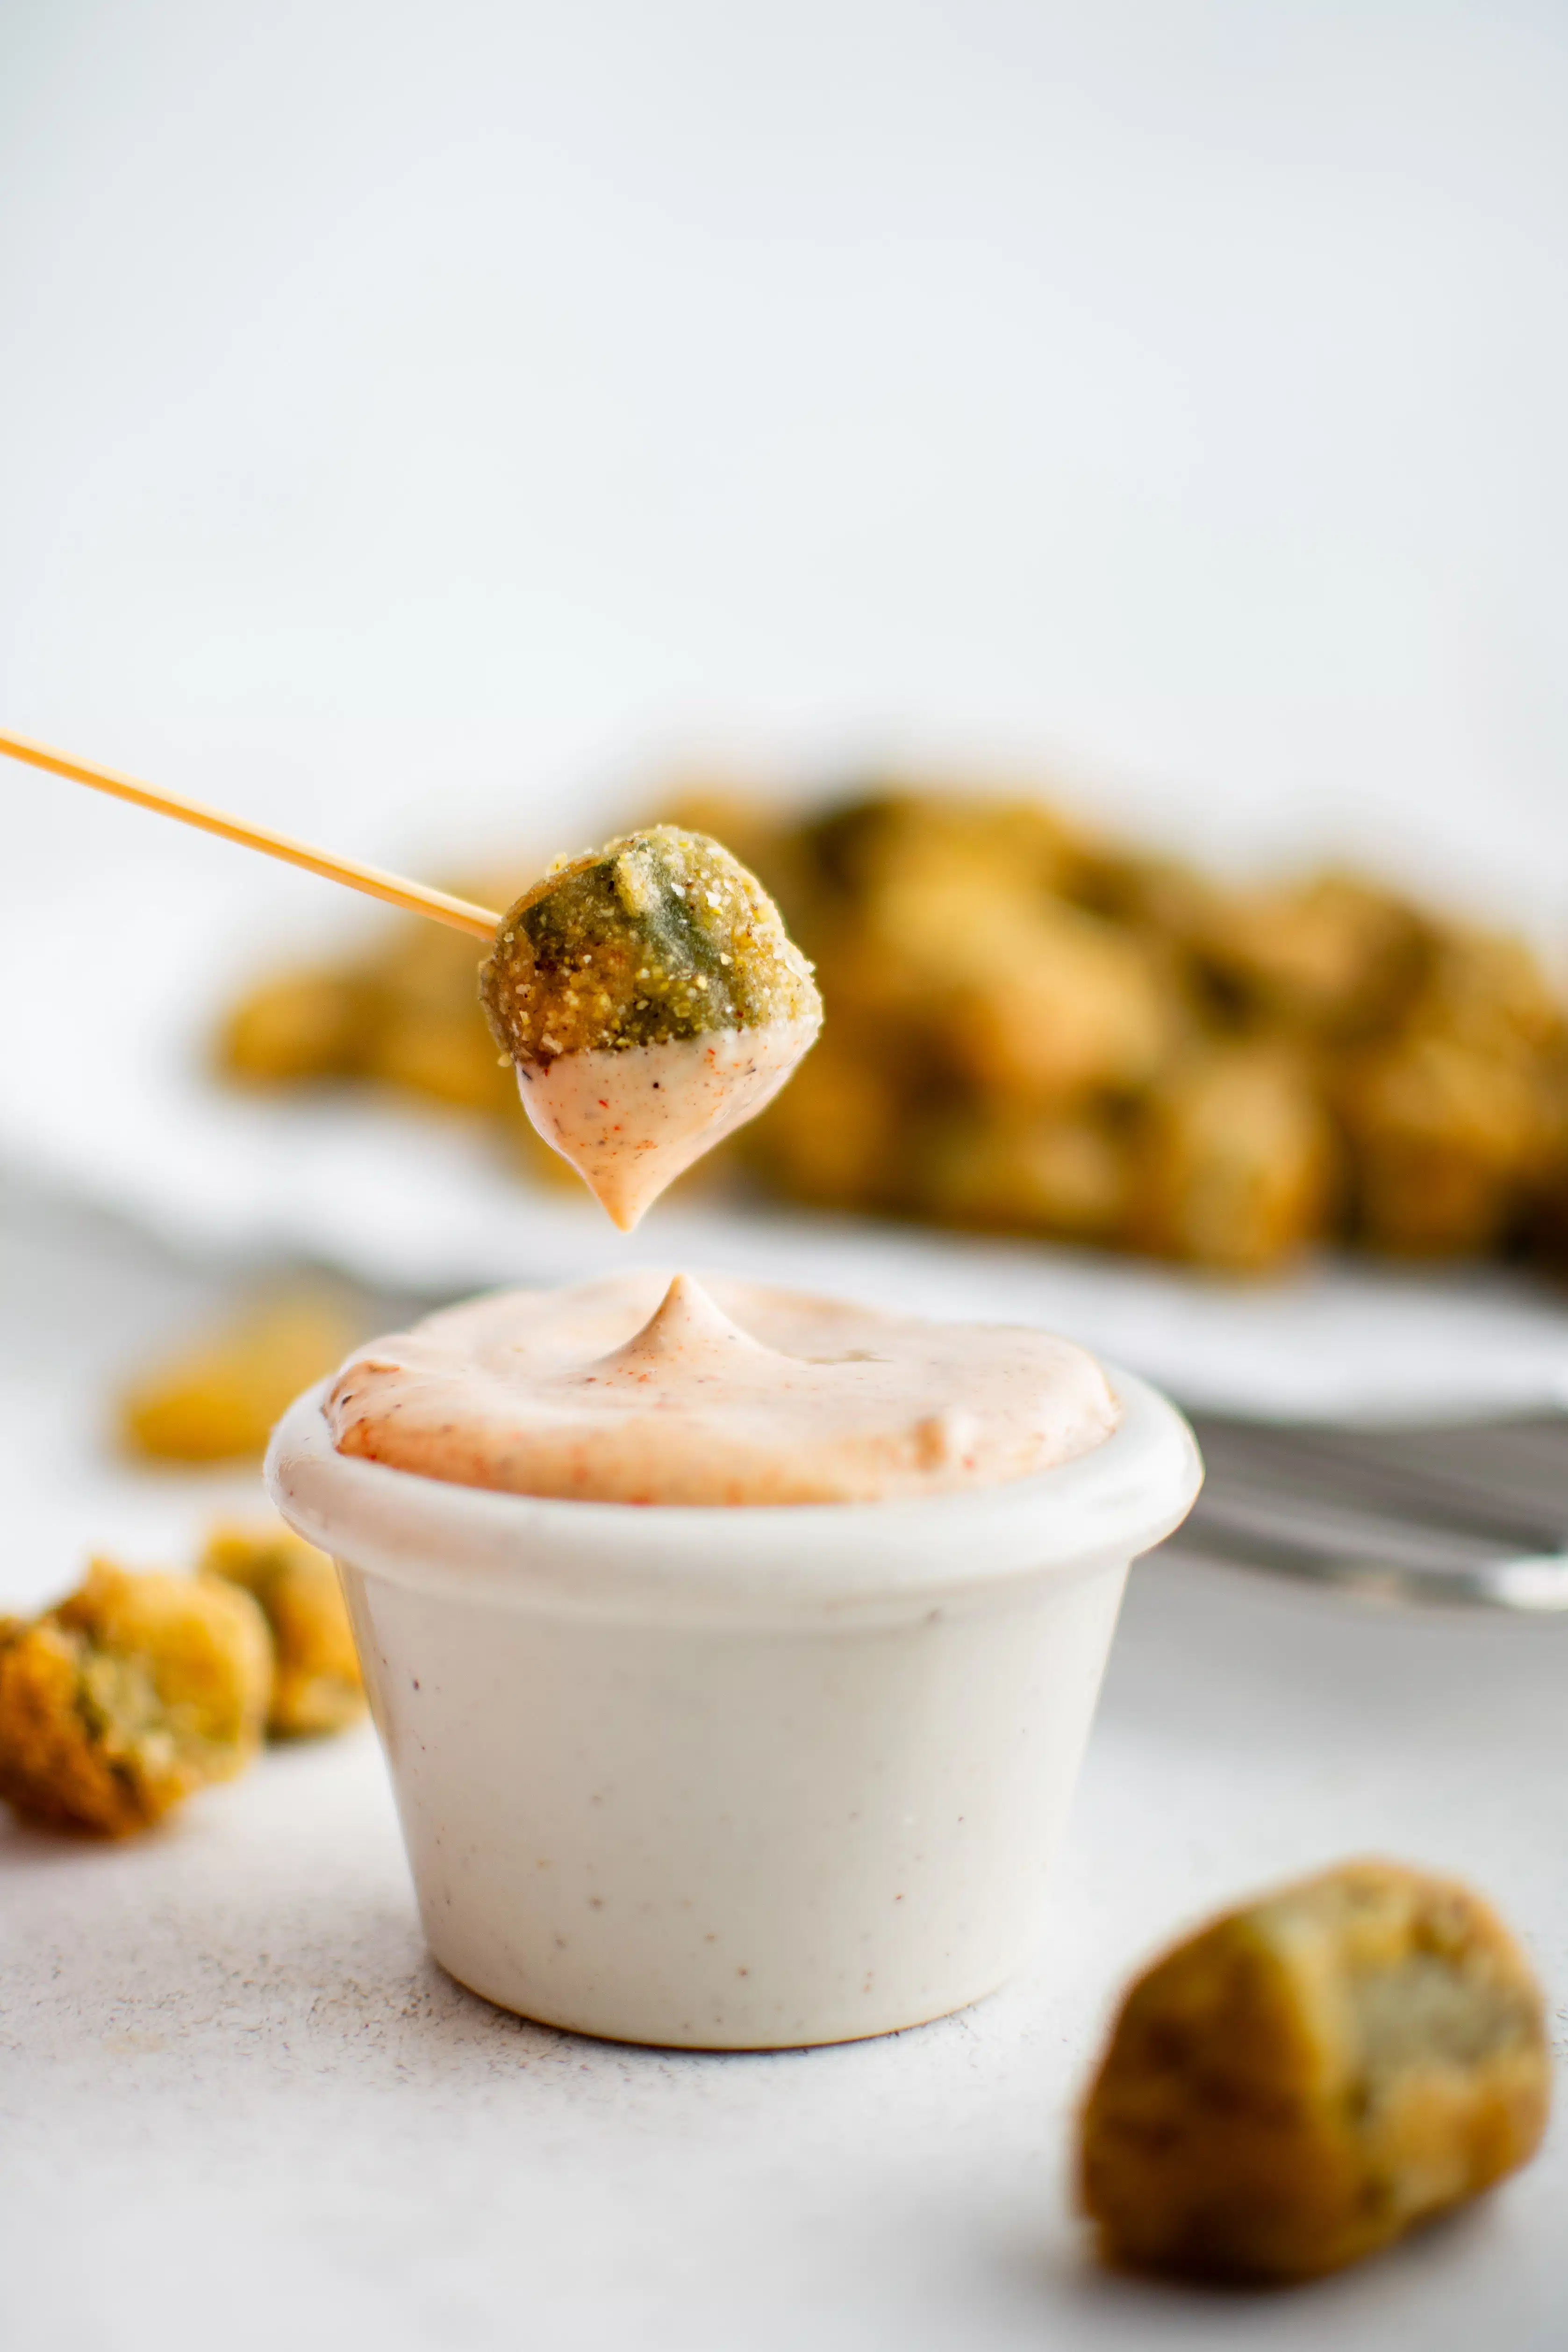 A toothpick with one piece of fried okra dipped into a small ramekin filled with creamy mayo dipping sauce.